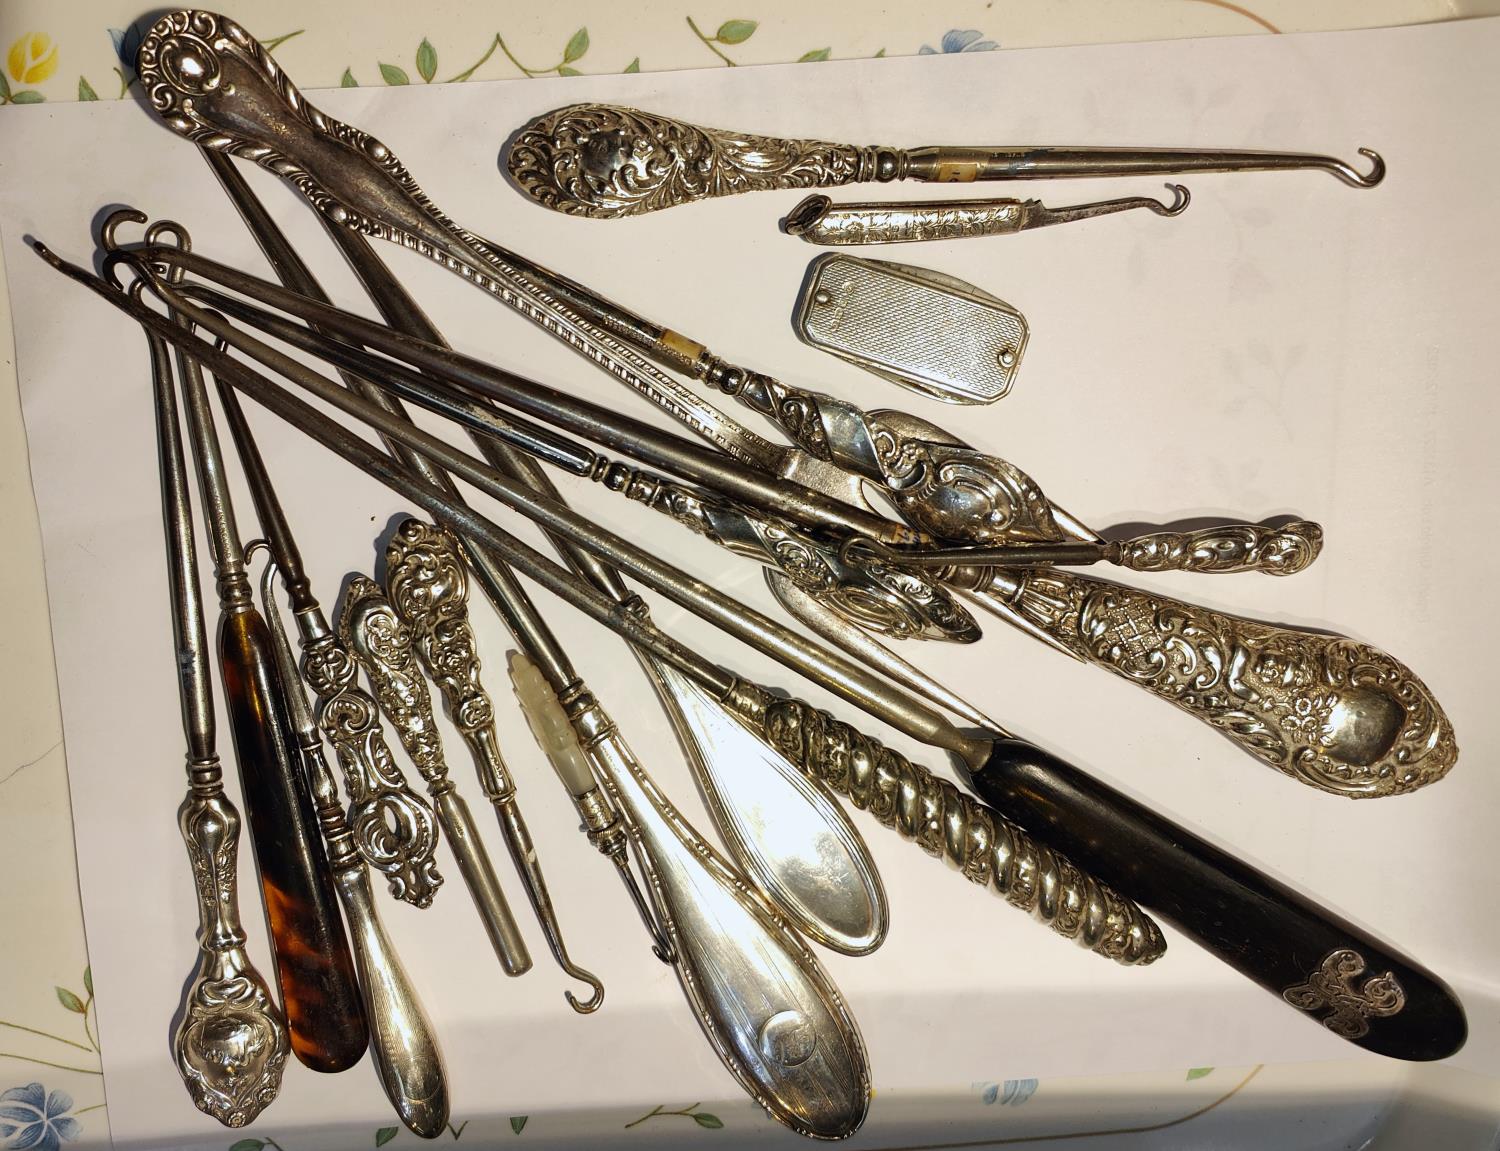 A collection of silver and other handled button hooks